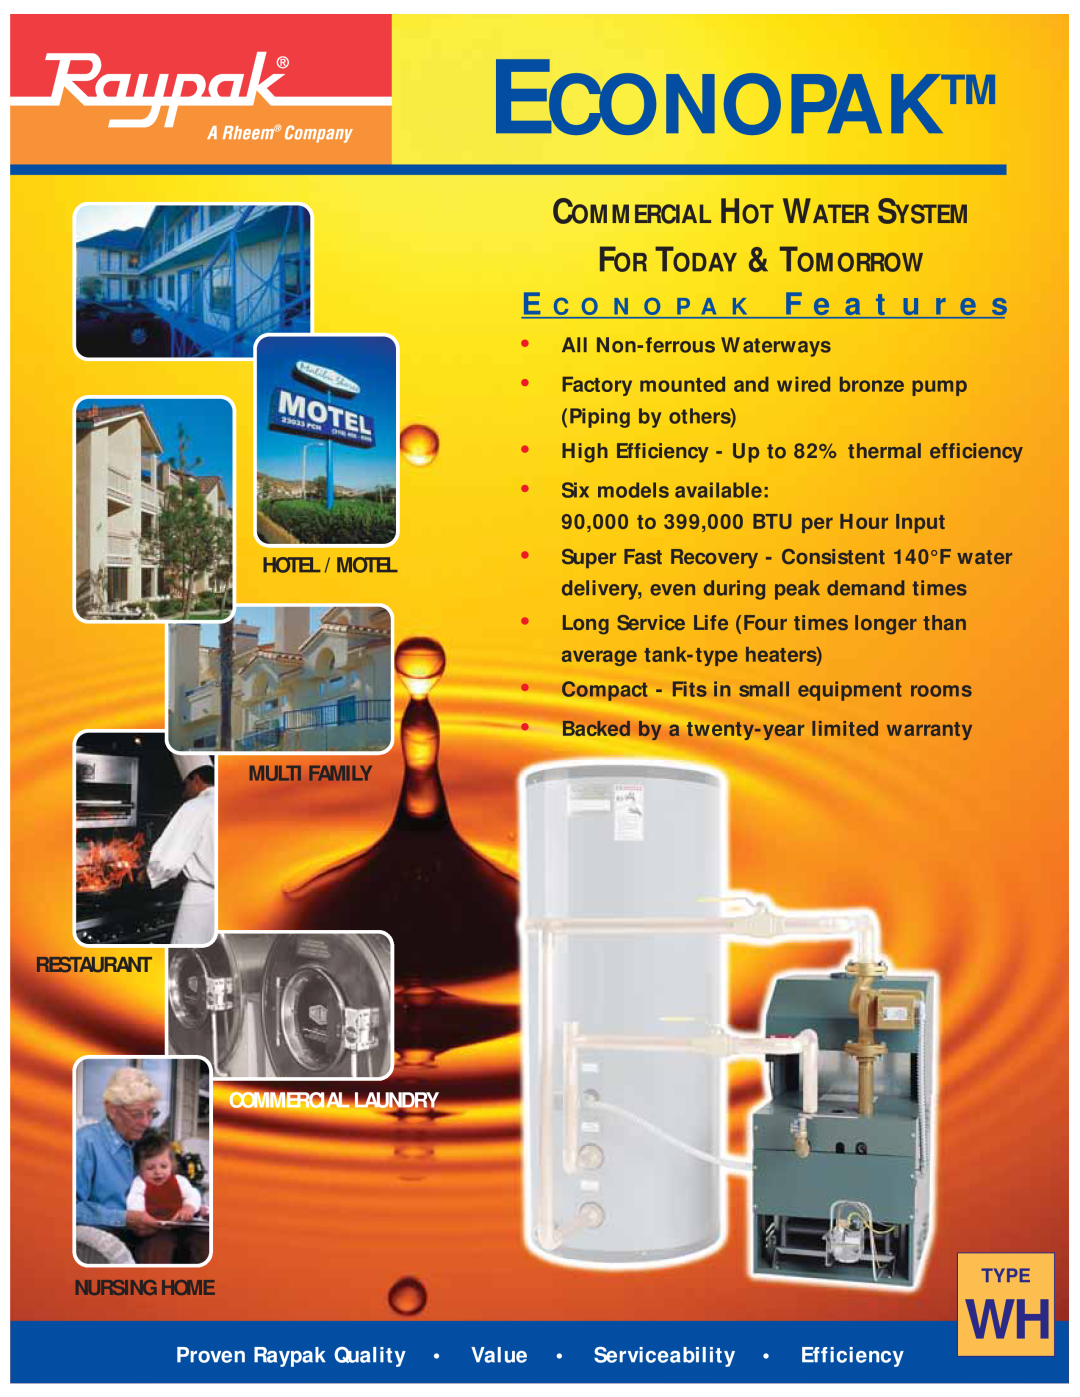 Raypak WH-135 warranty Econopaktm, E C O N O P A K F e a t u r e s, Commercial Hot Water System For Today & Tomorrow 